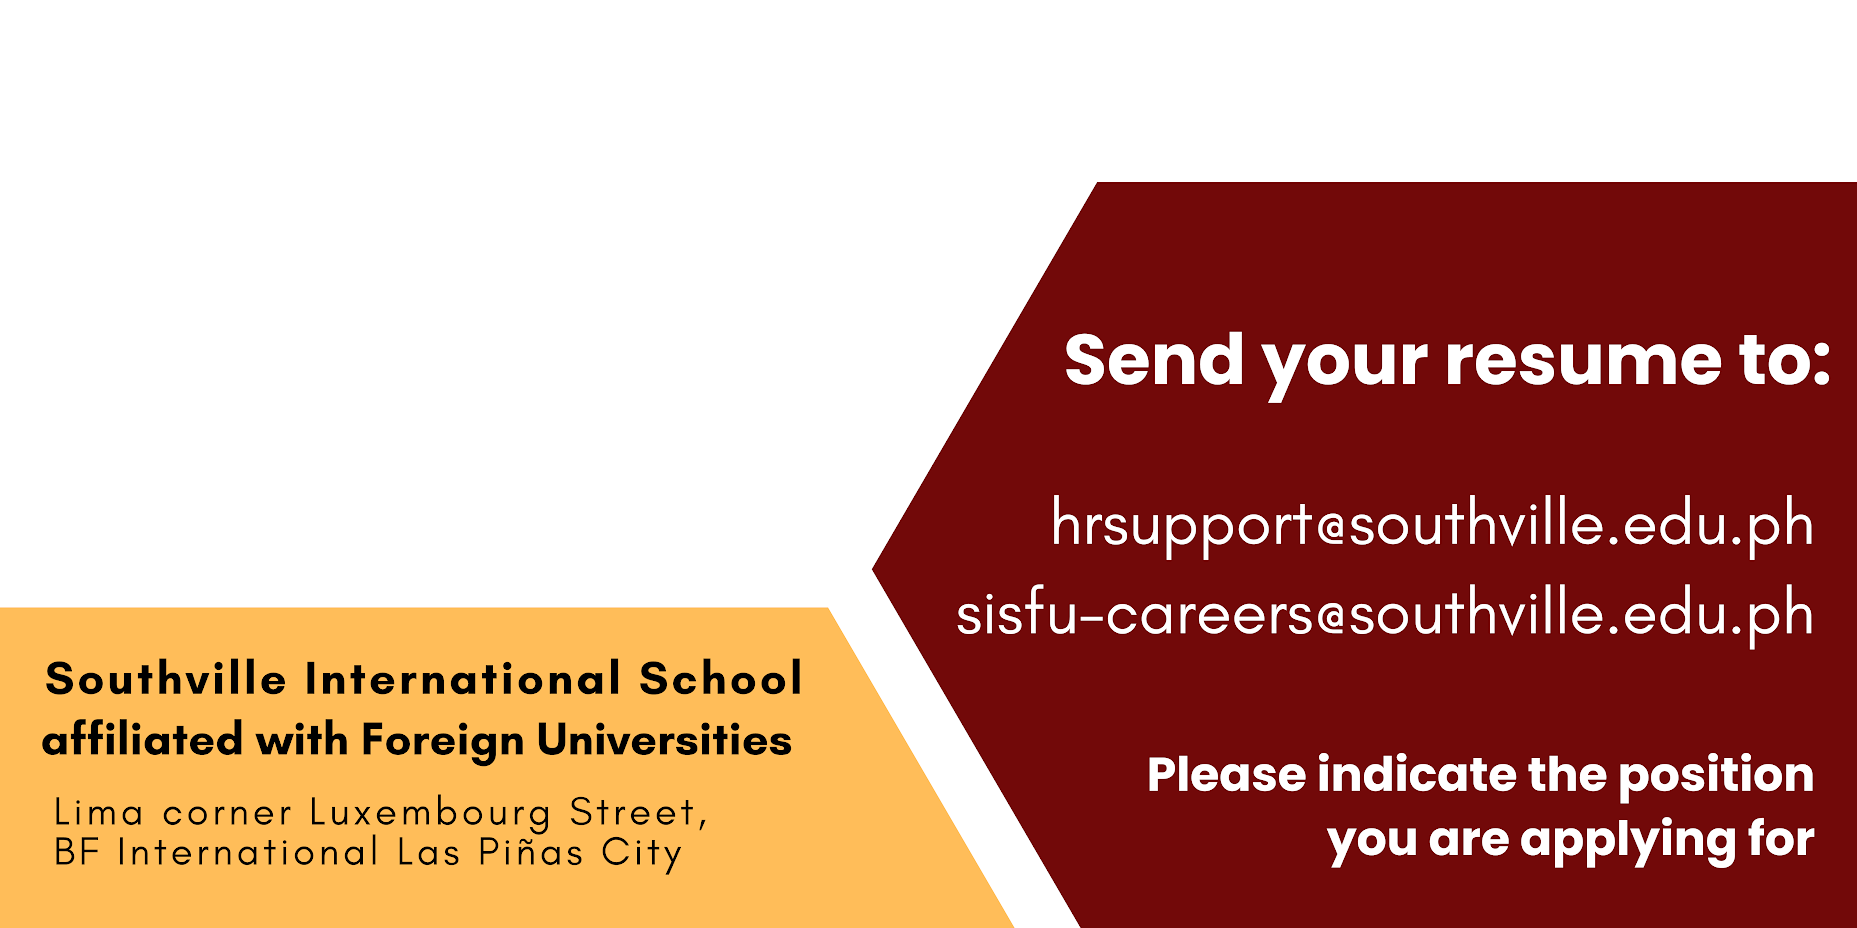 Foreign University International School Manila Philippines - Be one with us!